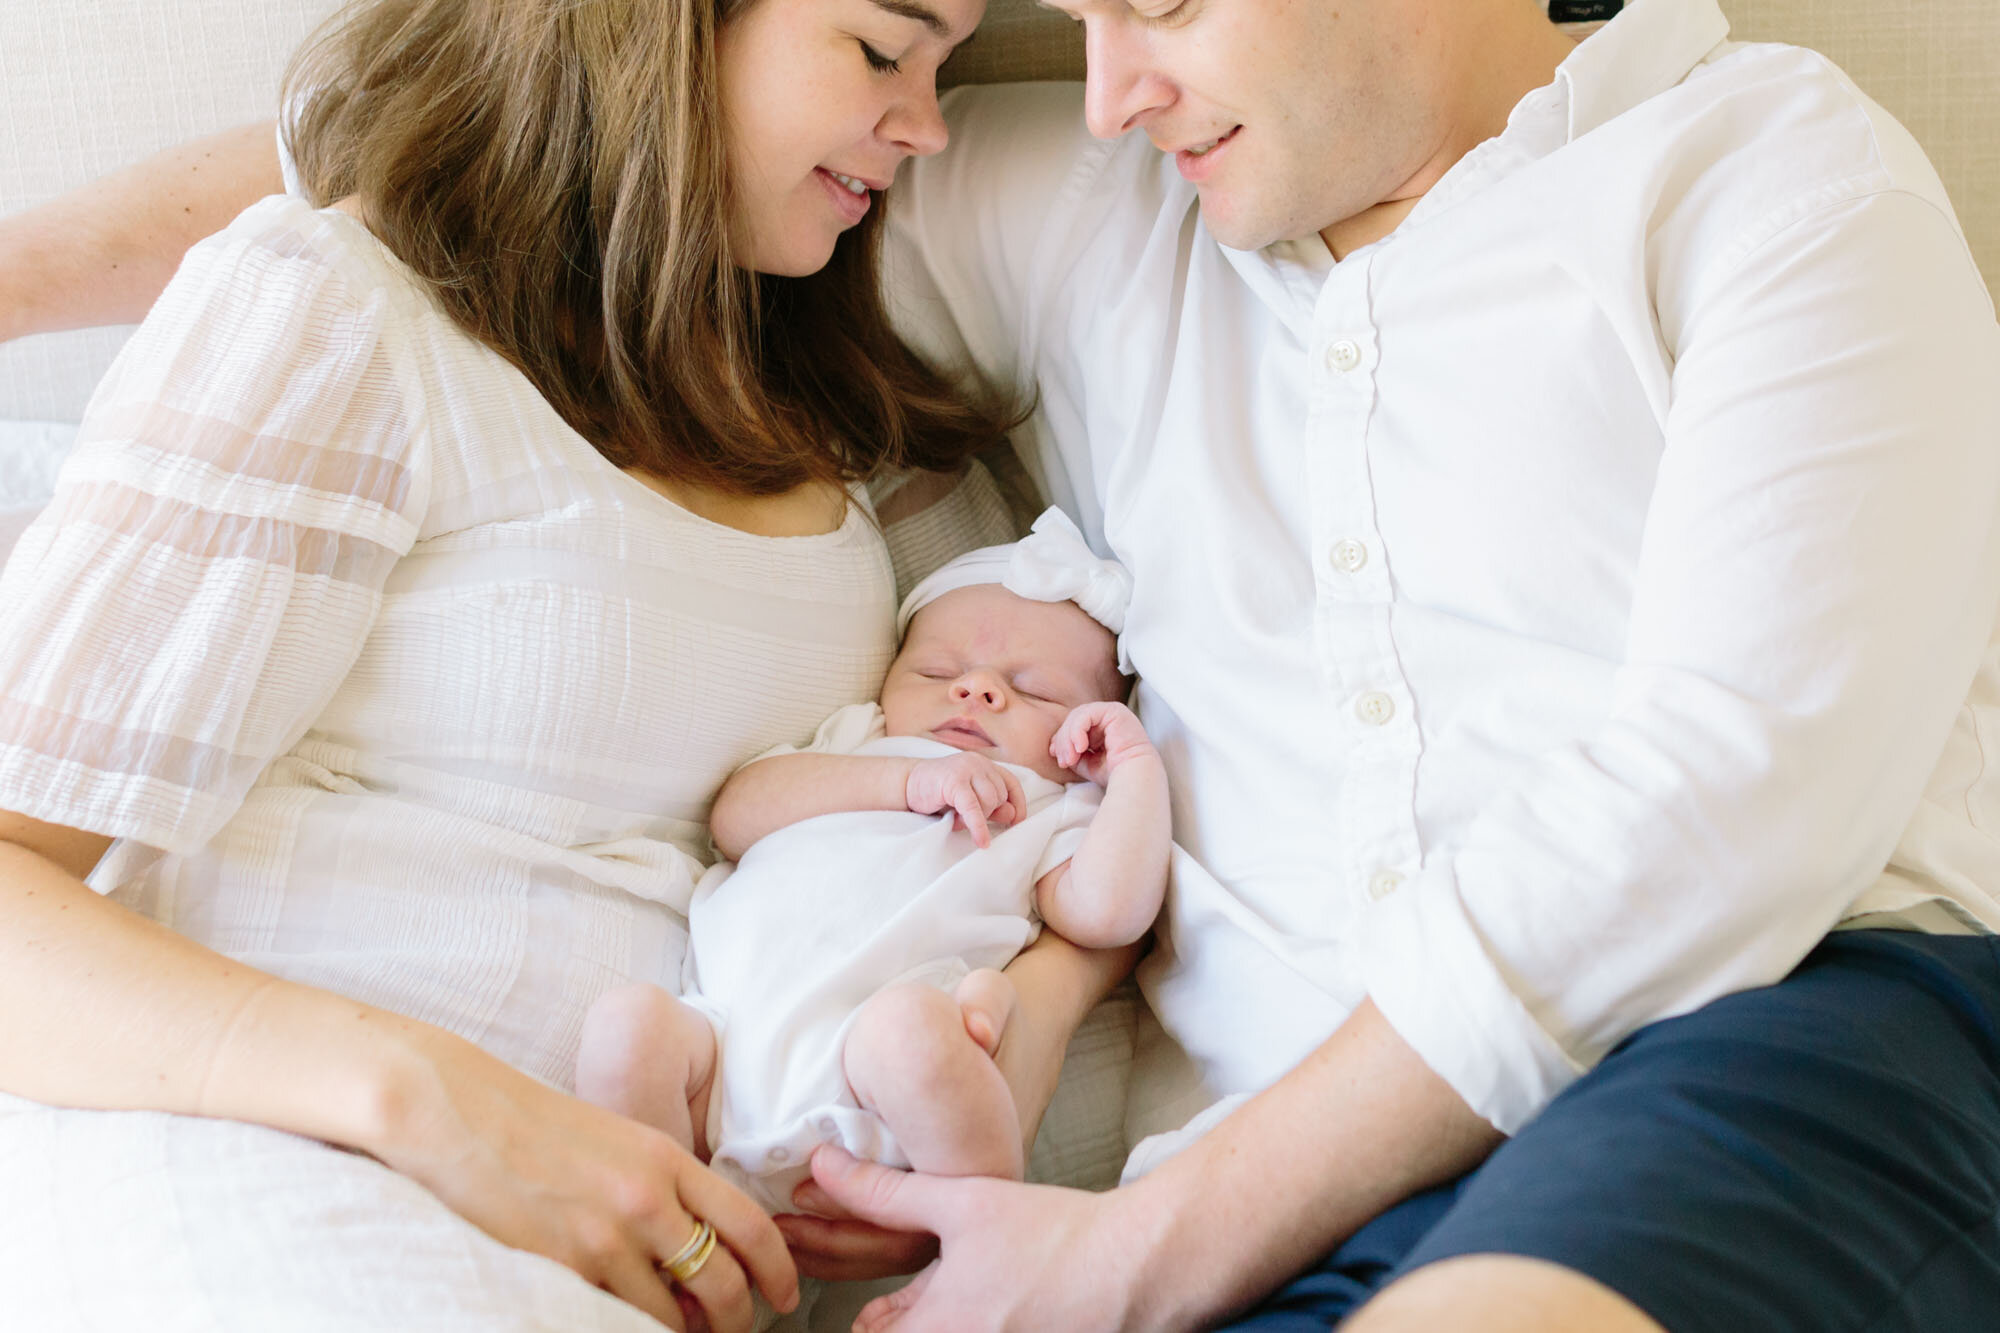 New York Family Photographer, Jacqueline Clair Photography features their latest newborn session in Hoboken